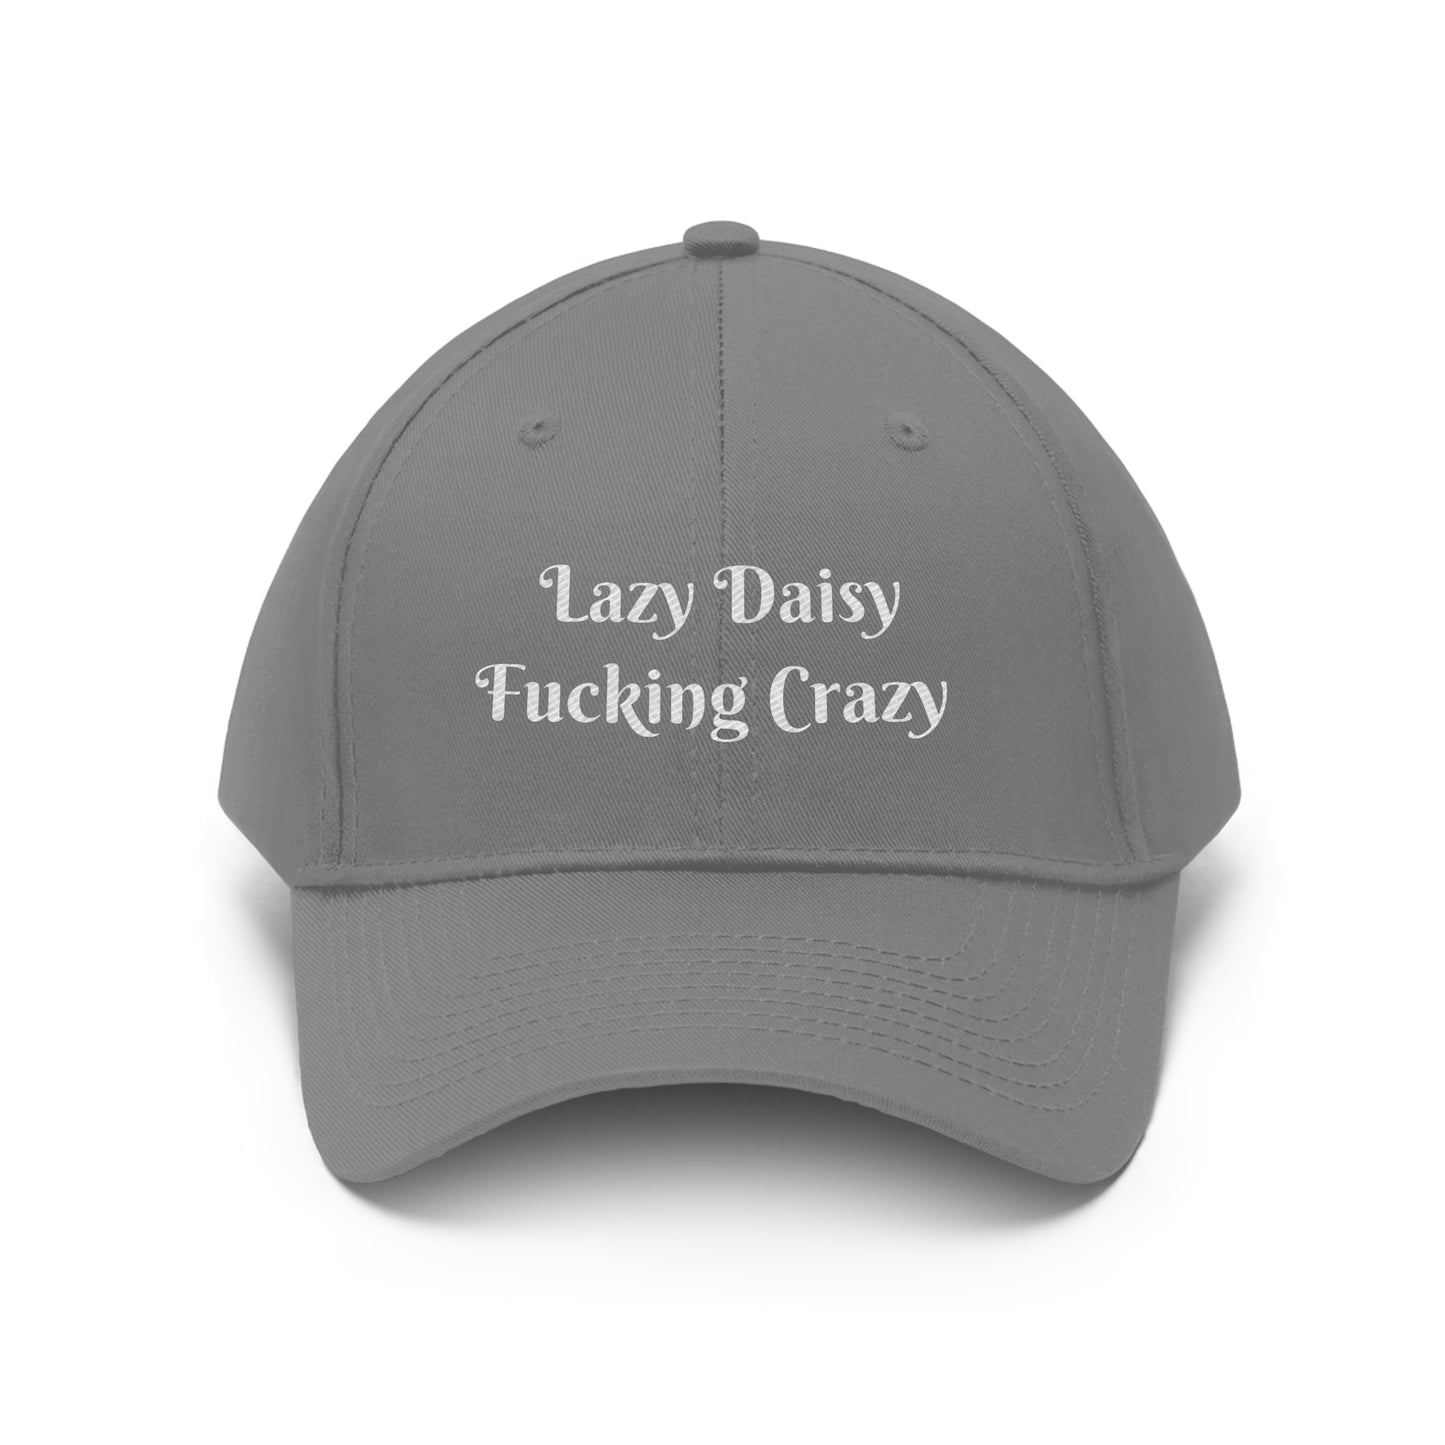 Lazy Daisy, Fucking Crazy Embroidered Hat for Unapologetically Fun Style